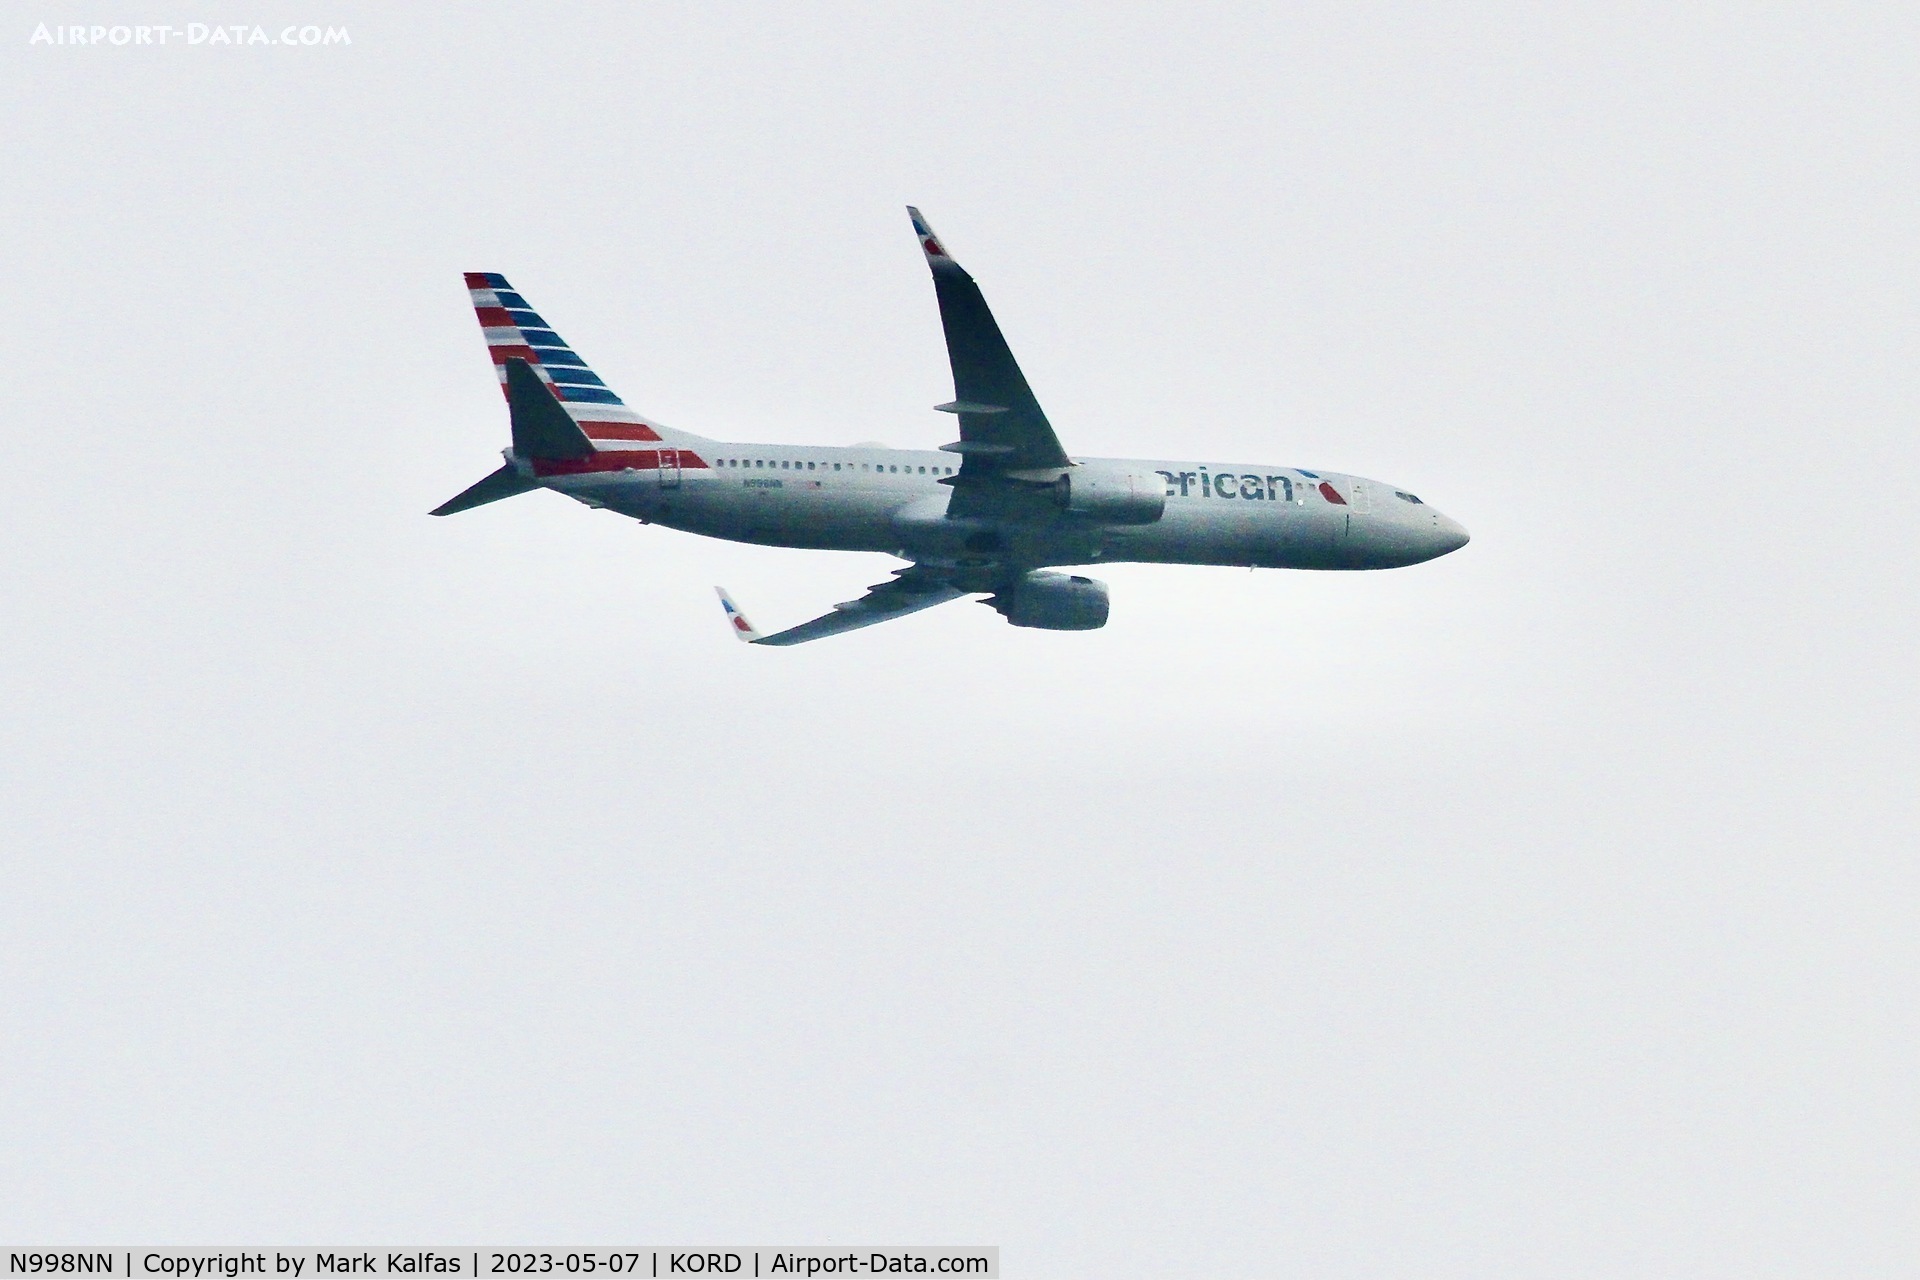 N998NN, 2016 Boeing 737-823 C/N 31250, American Airlines B738 N998NN, Operating as AA671 from ATL to ORD- on approach to O'Hare